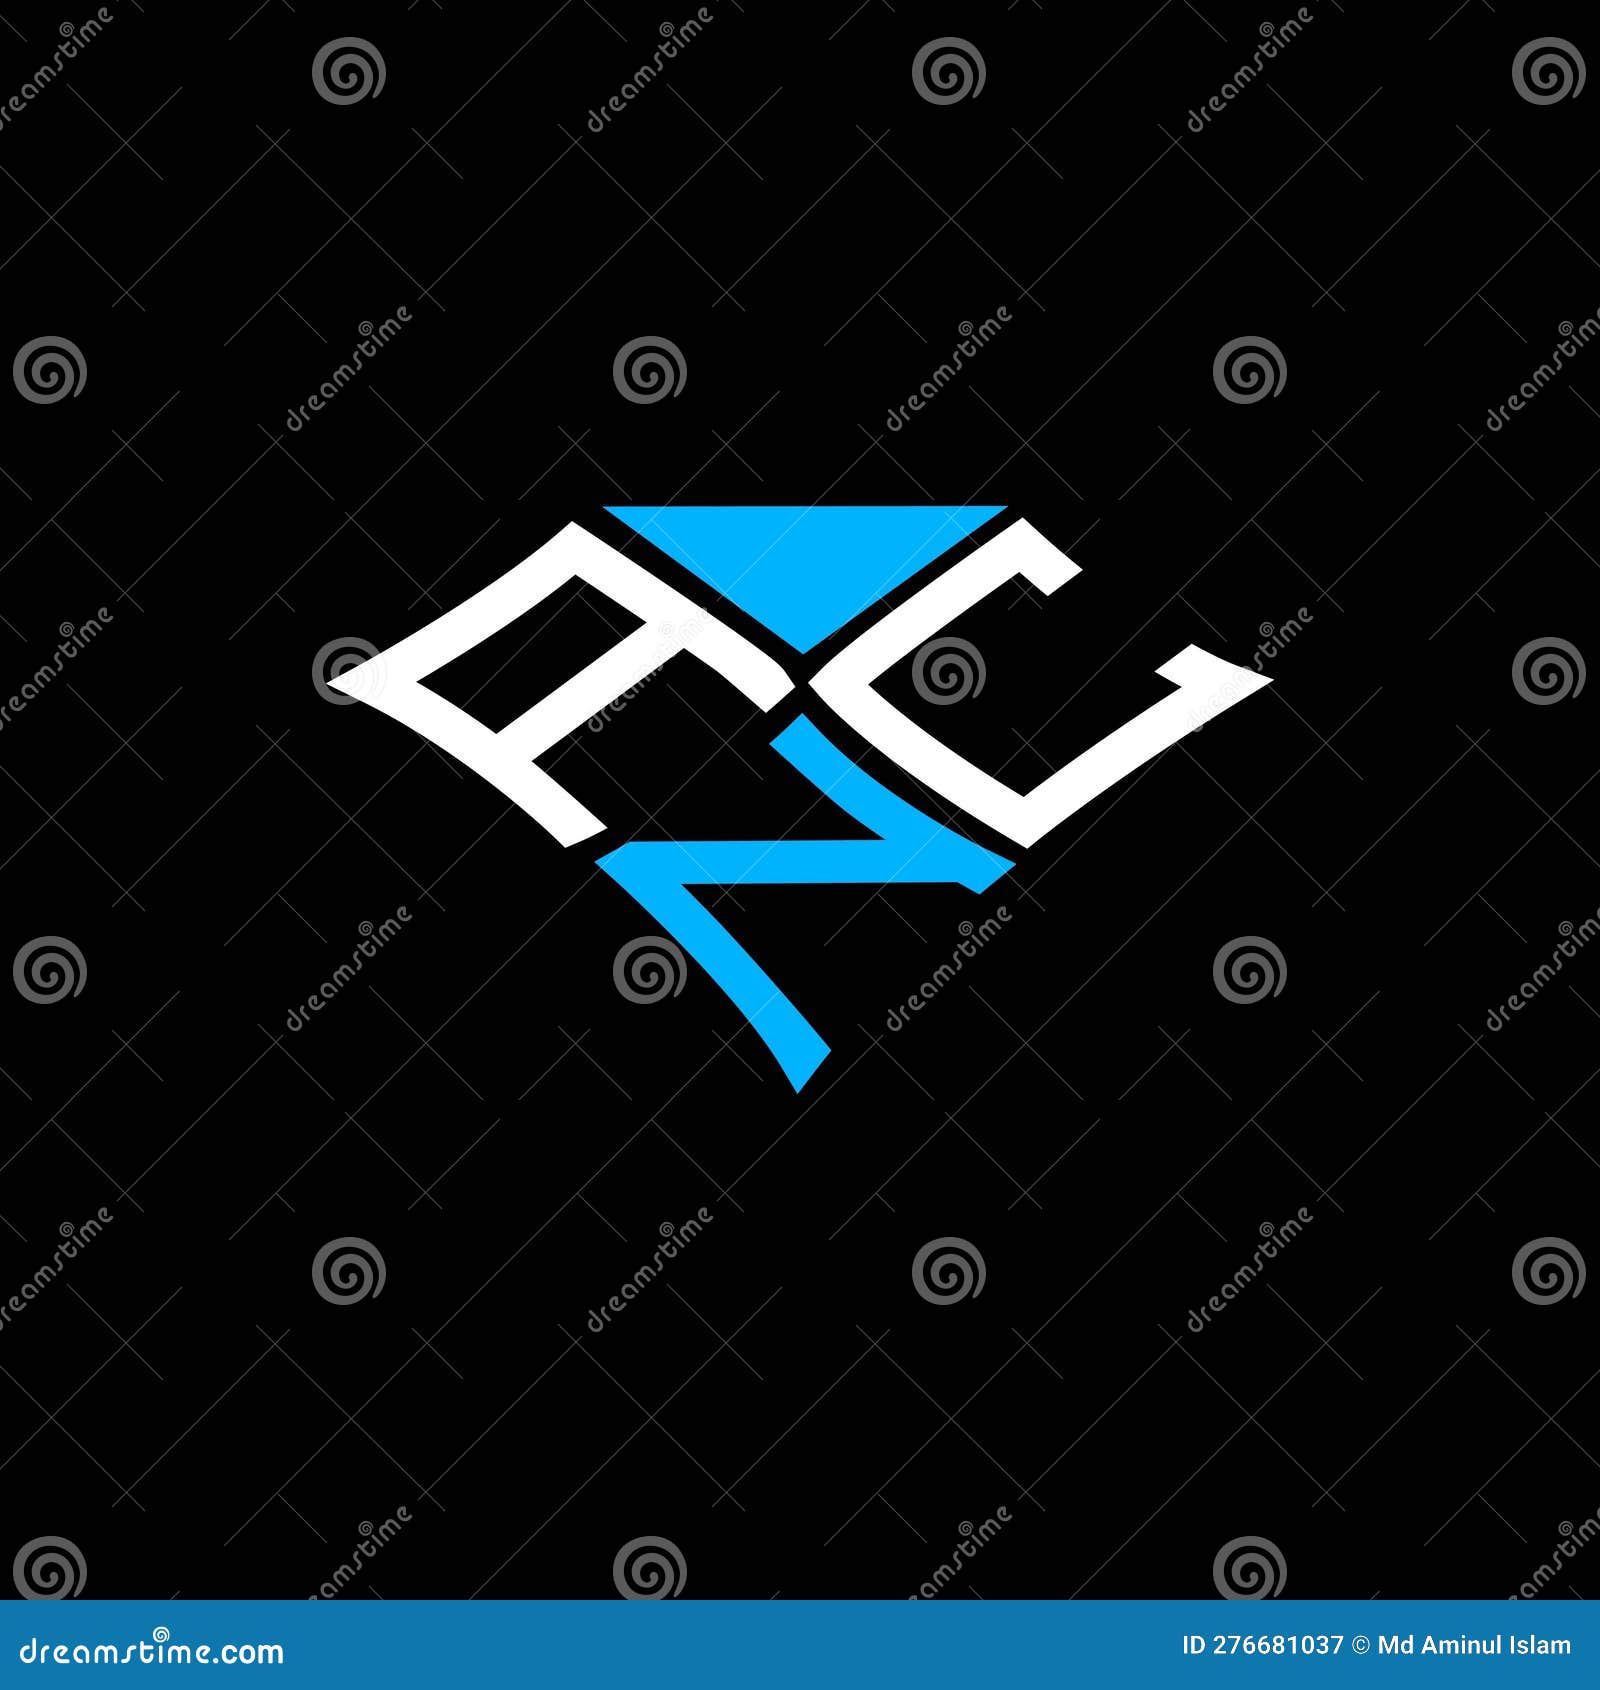 anc letter logo creative  with  graphic,